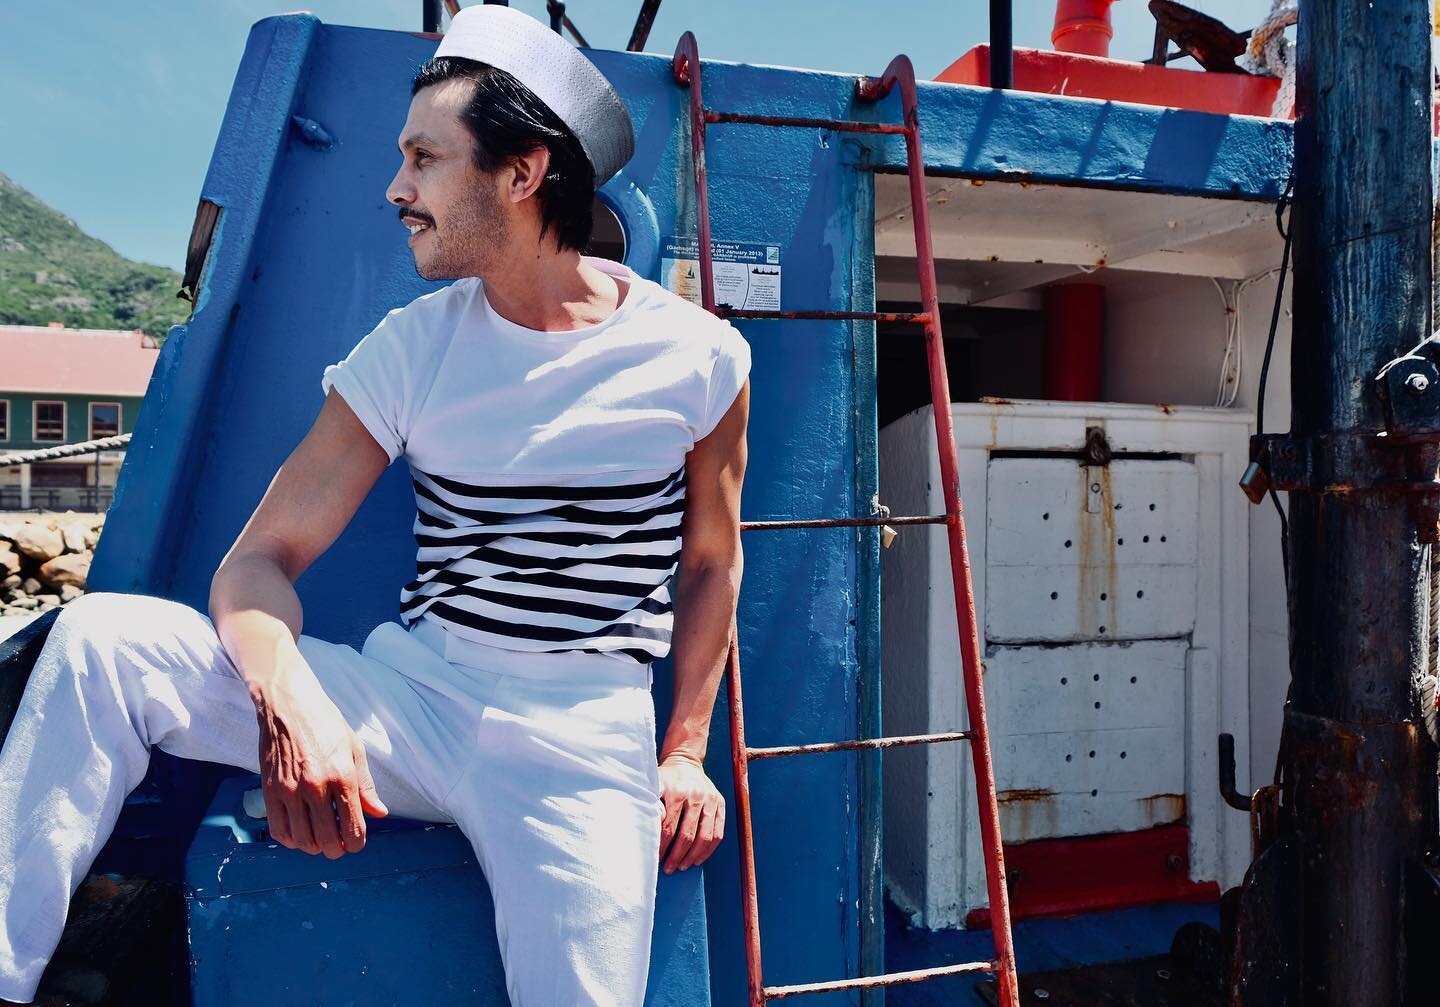 The nautical trend is a vibe and @jpgaultierofficial is one of the greatest champions of this style. Check out my latest feature on Jacobsman.com 

#style #menswear #fashion #jacobsman #jeanpaulgaultier